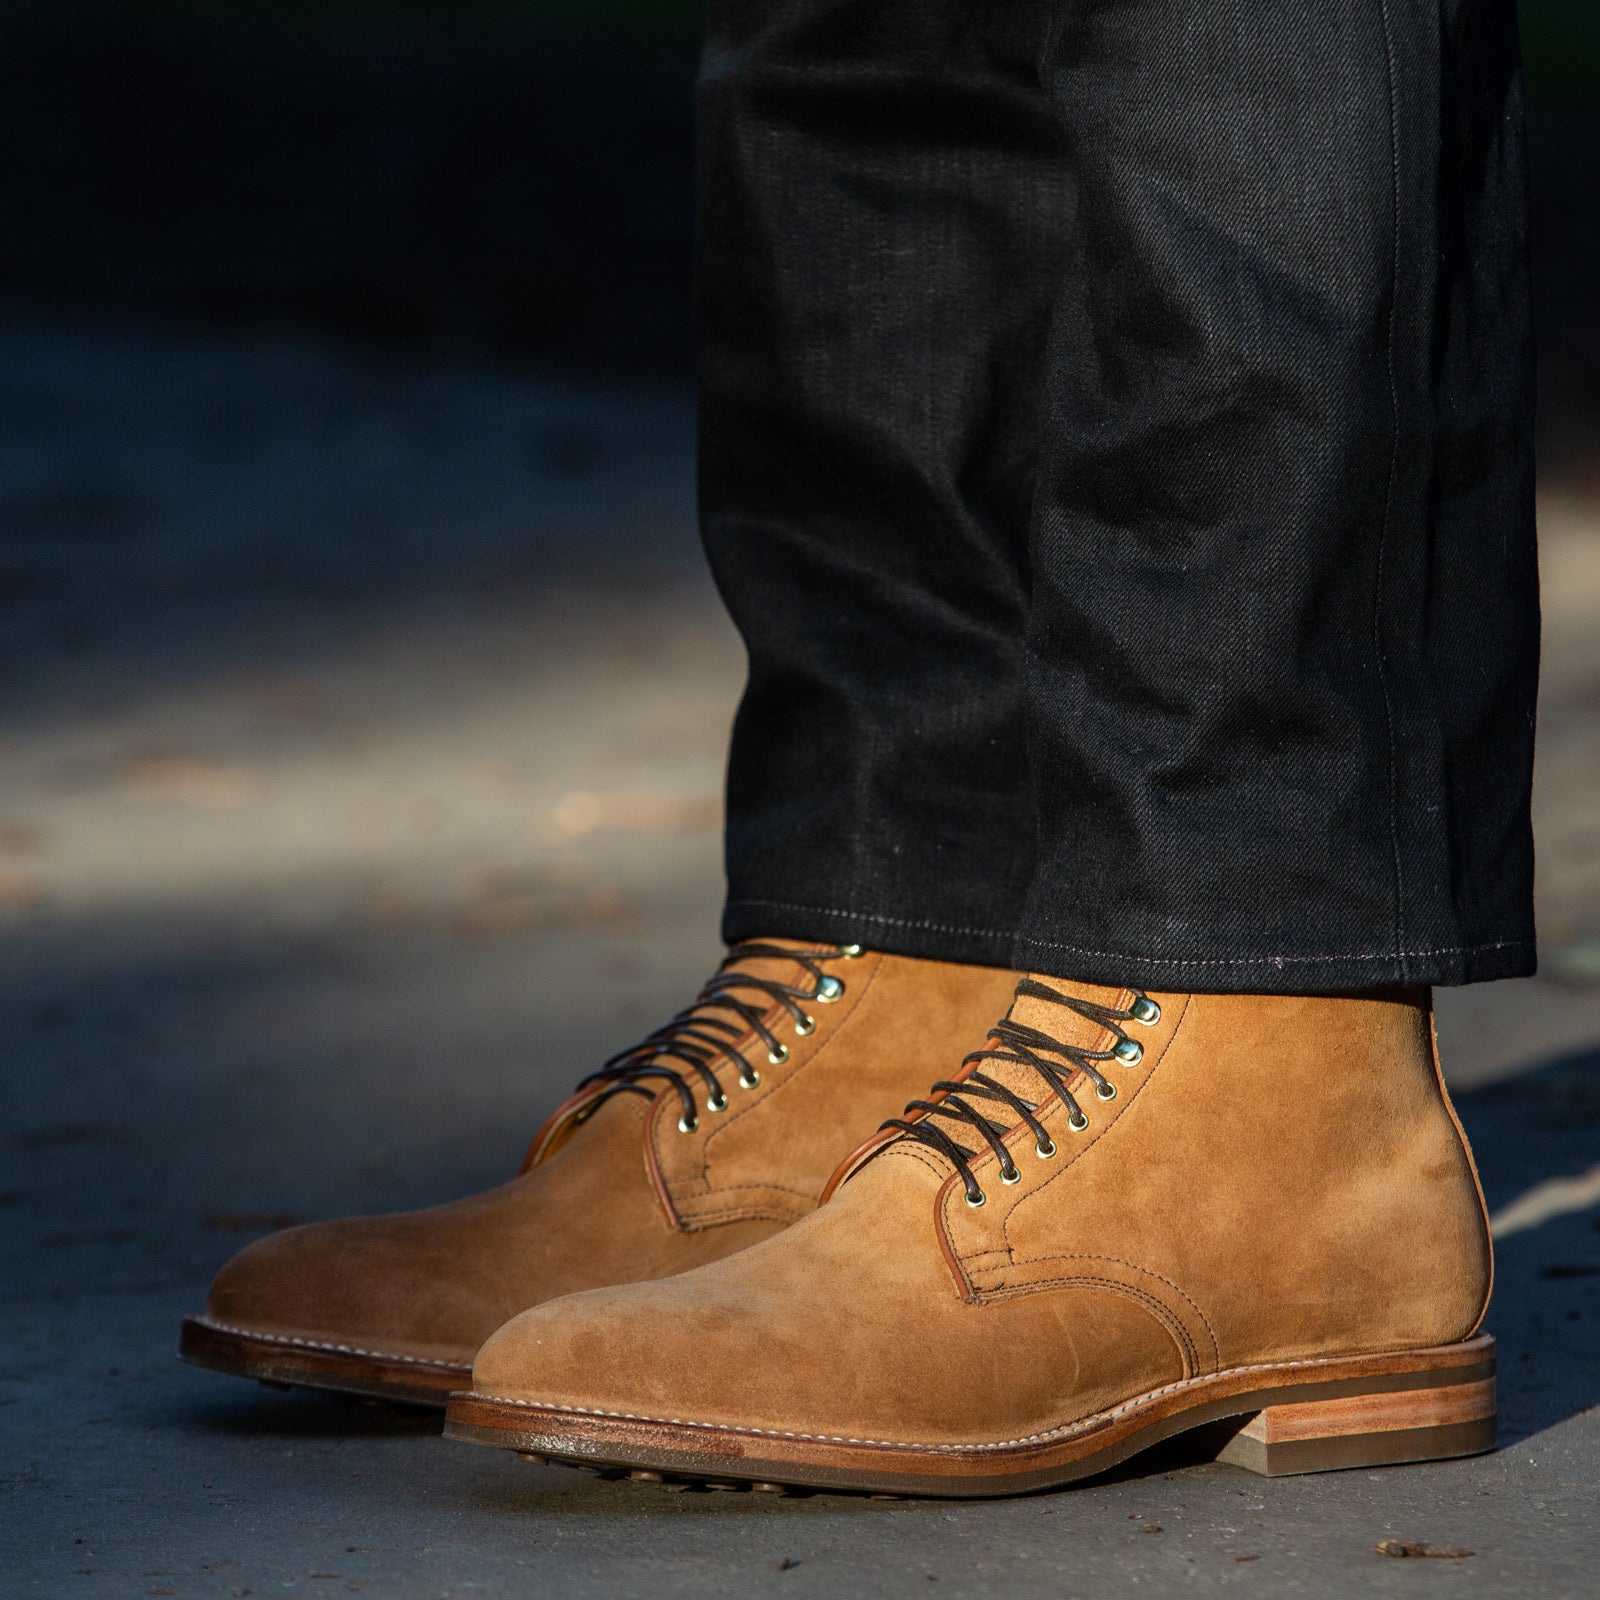 Viberg Derby Boot - Anise Calf Suede 